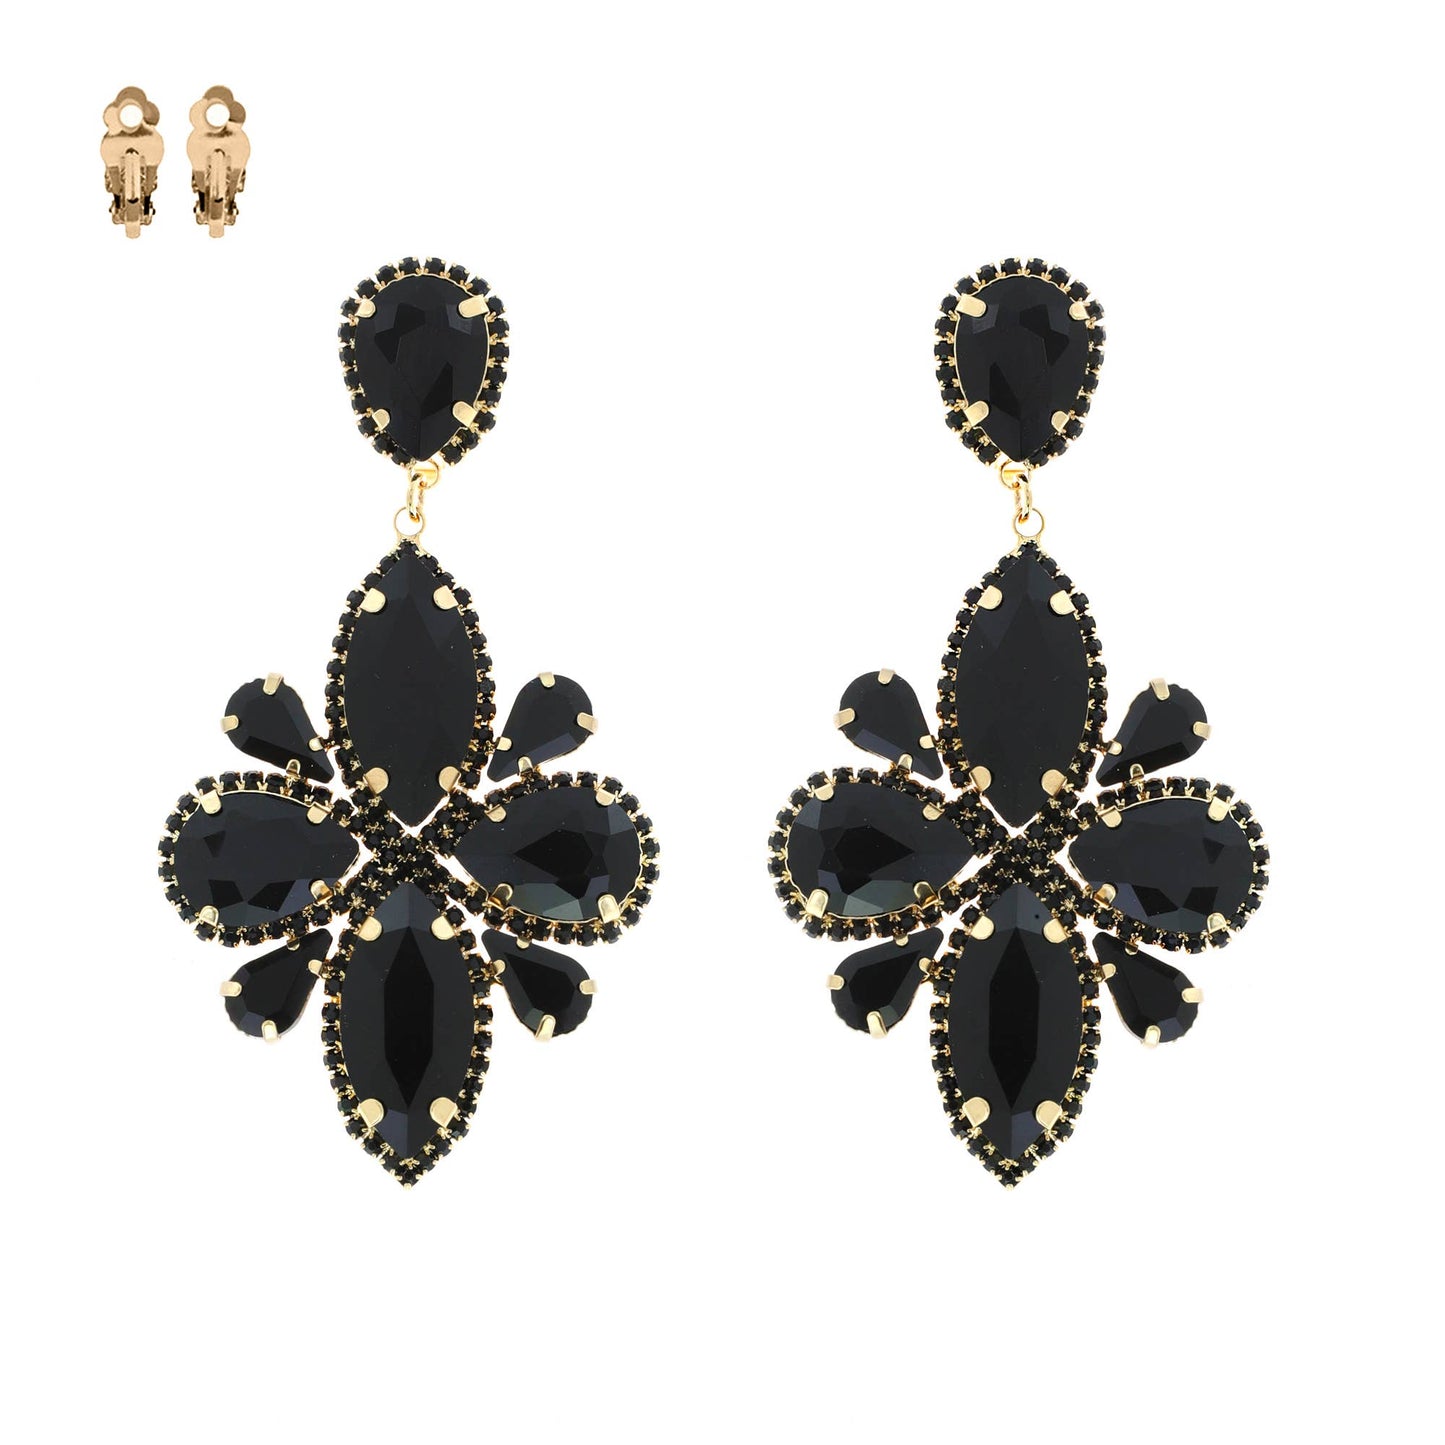 Statement Large Crystal Flower Clip On Earrings: Gold Black